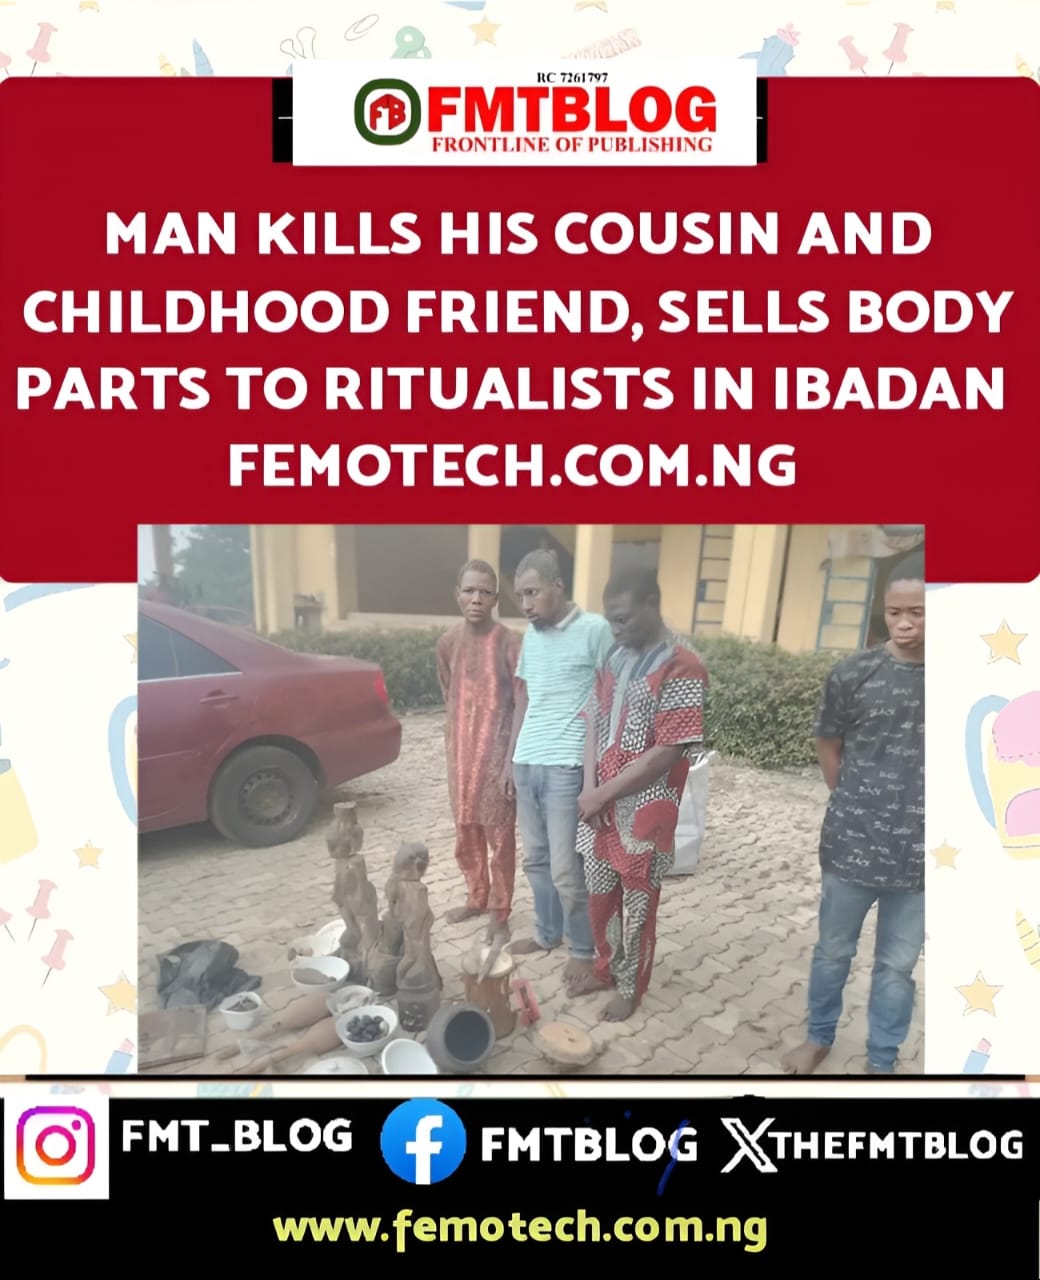 Man Kills His Cousin And Childhood Friend, Sells Body Parts To Ritualists In Ibadan (Photo)